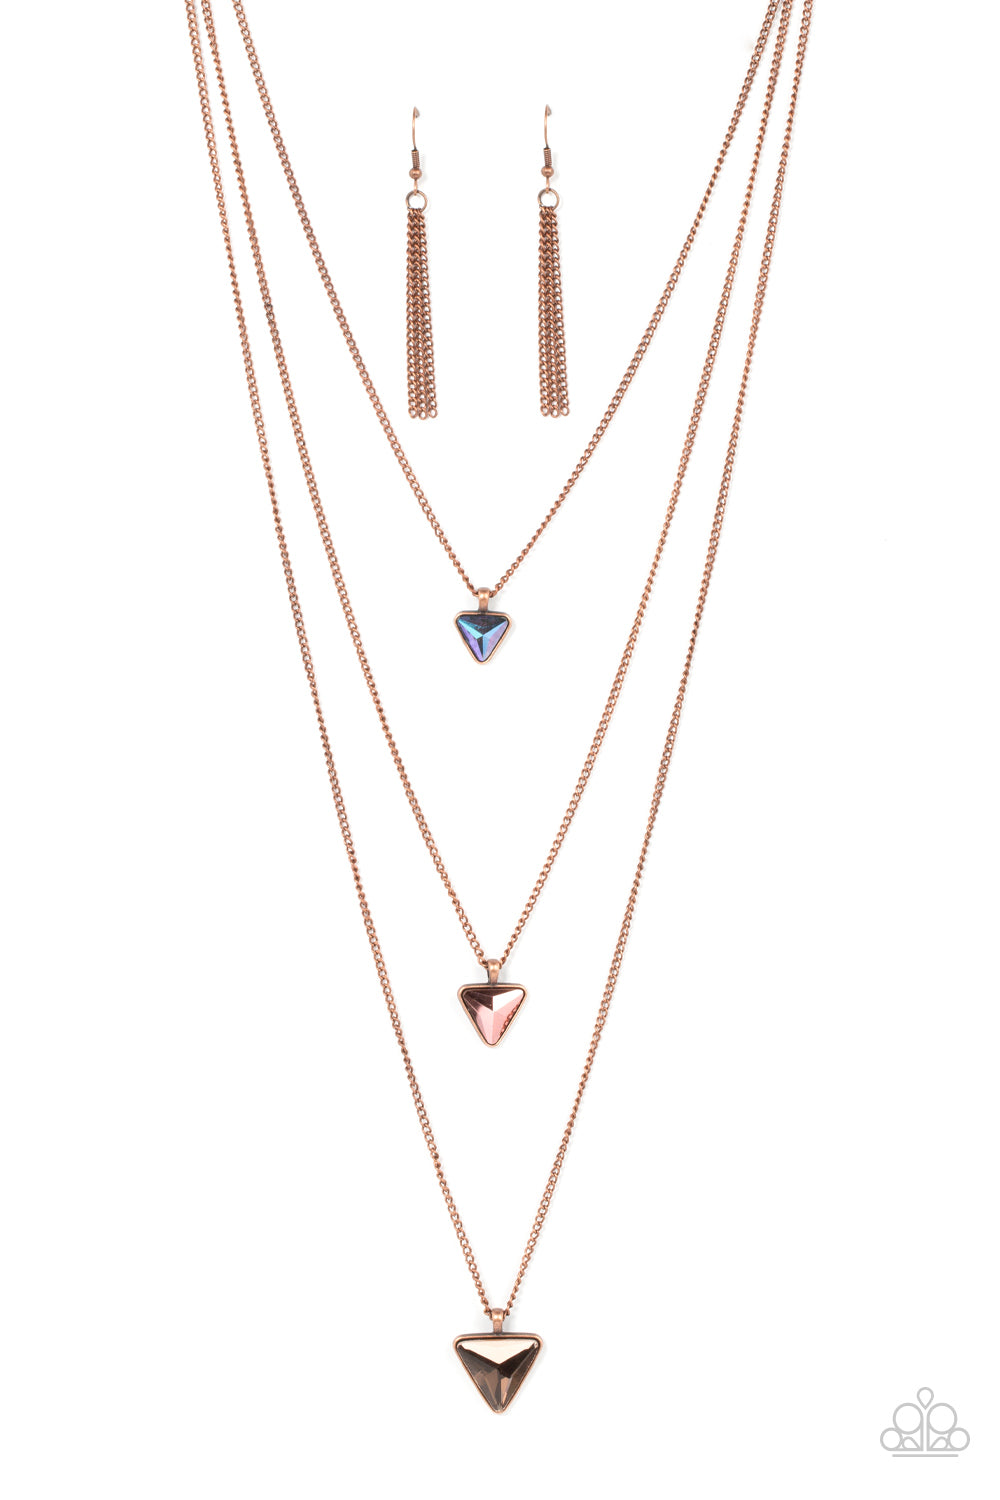 Follow the LUSTER Copper Necklace